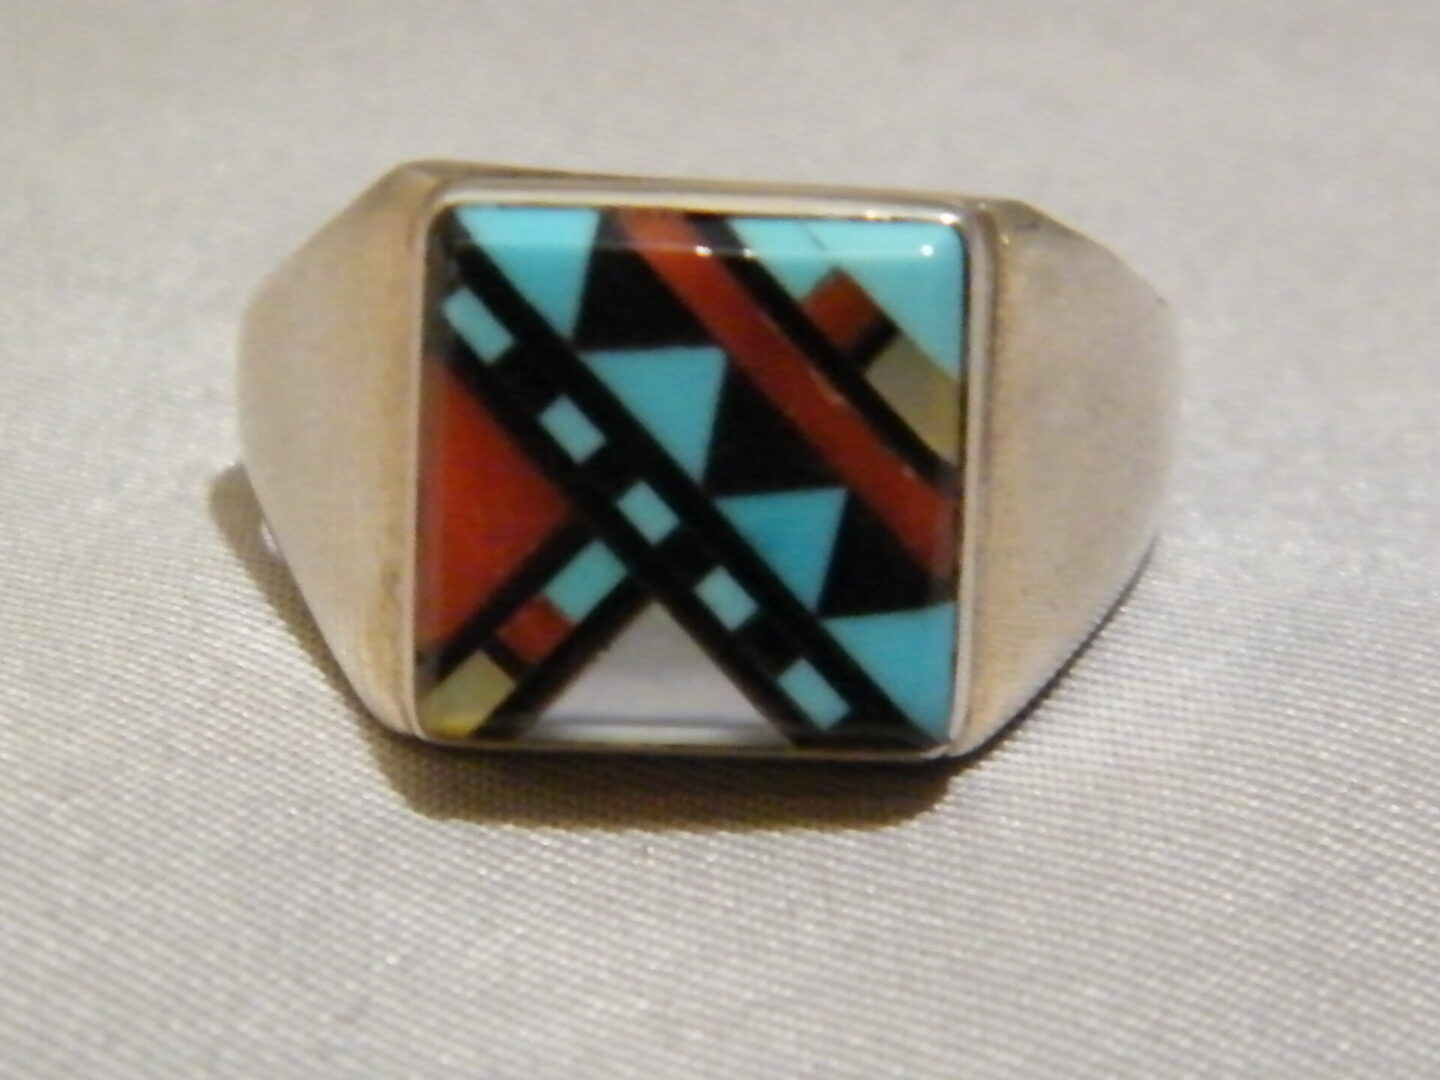 A Silver Ring With Blue, Black and White Square Stone